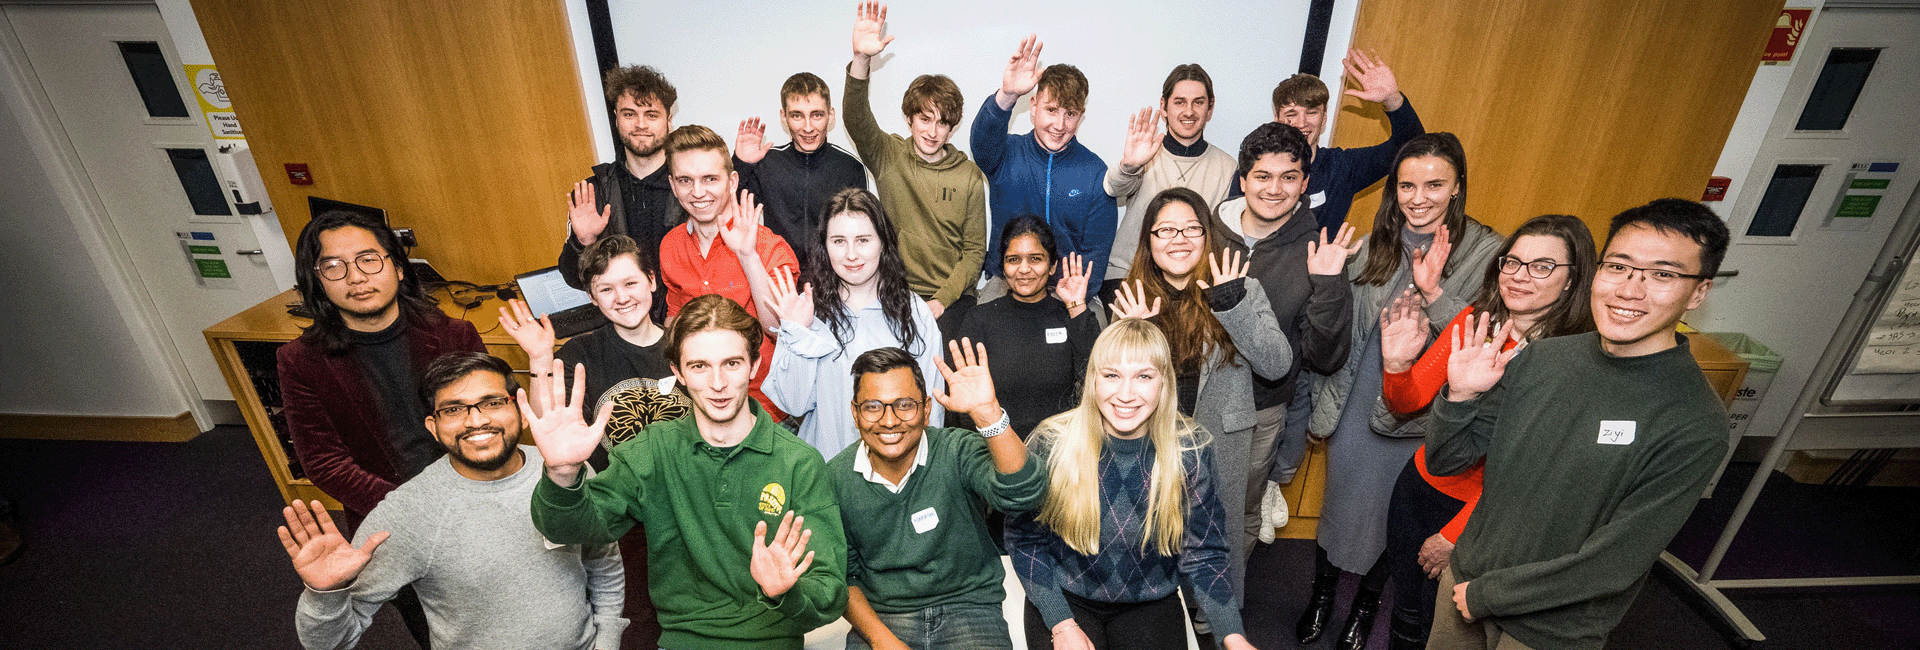 High angle photo of group of young people in a room waving towards camera